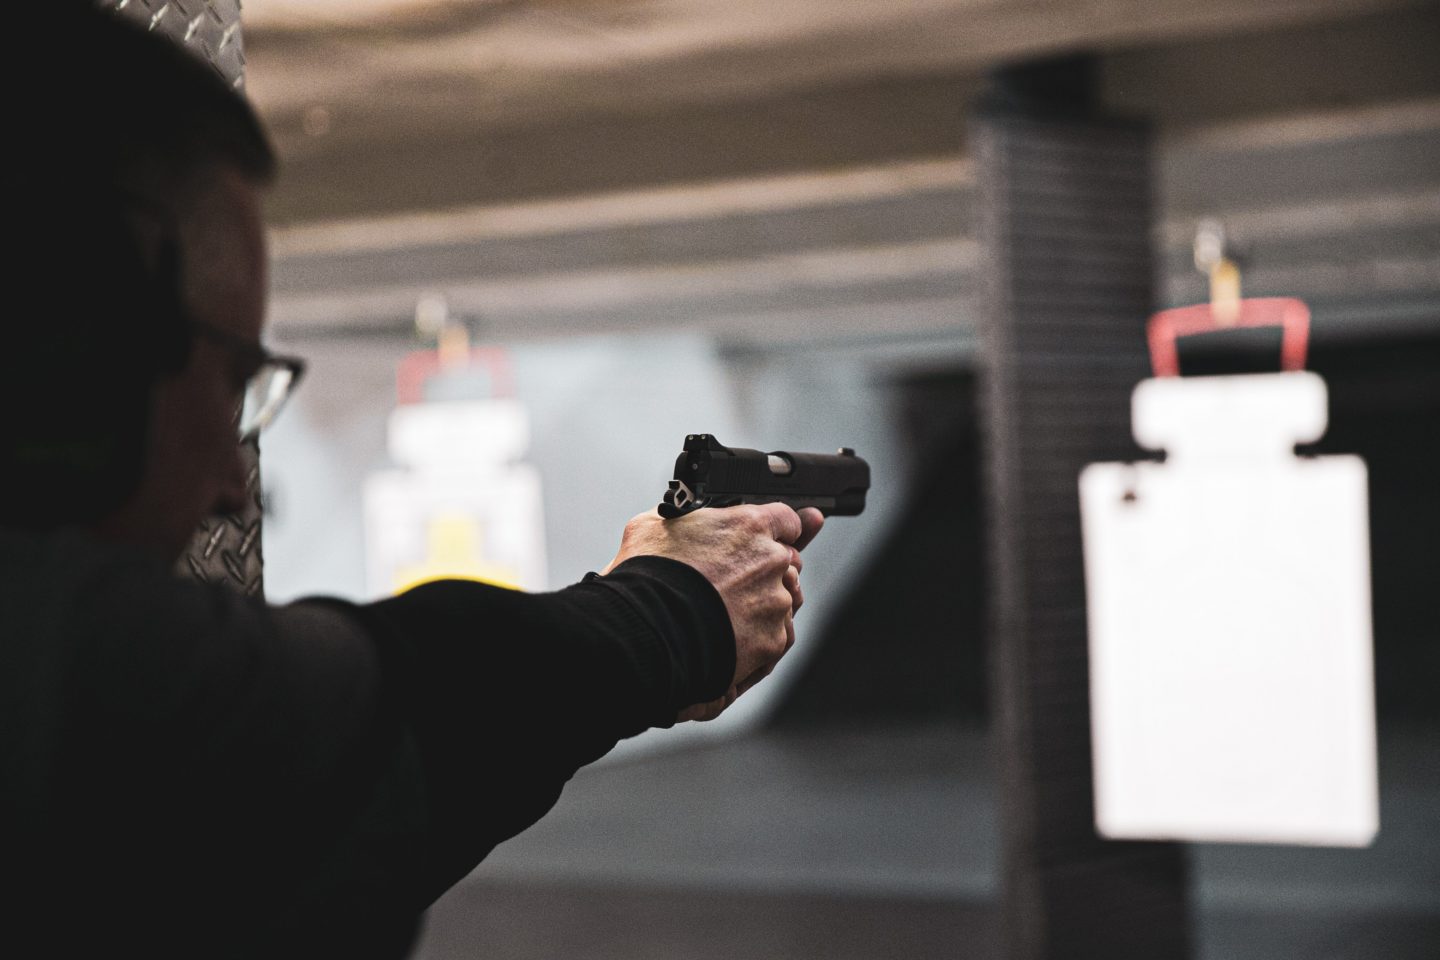 The Beginner’s Checklist to Becoming a Responsible Gun Owner